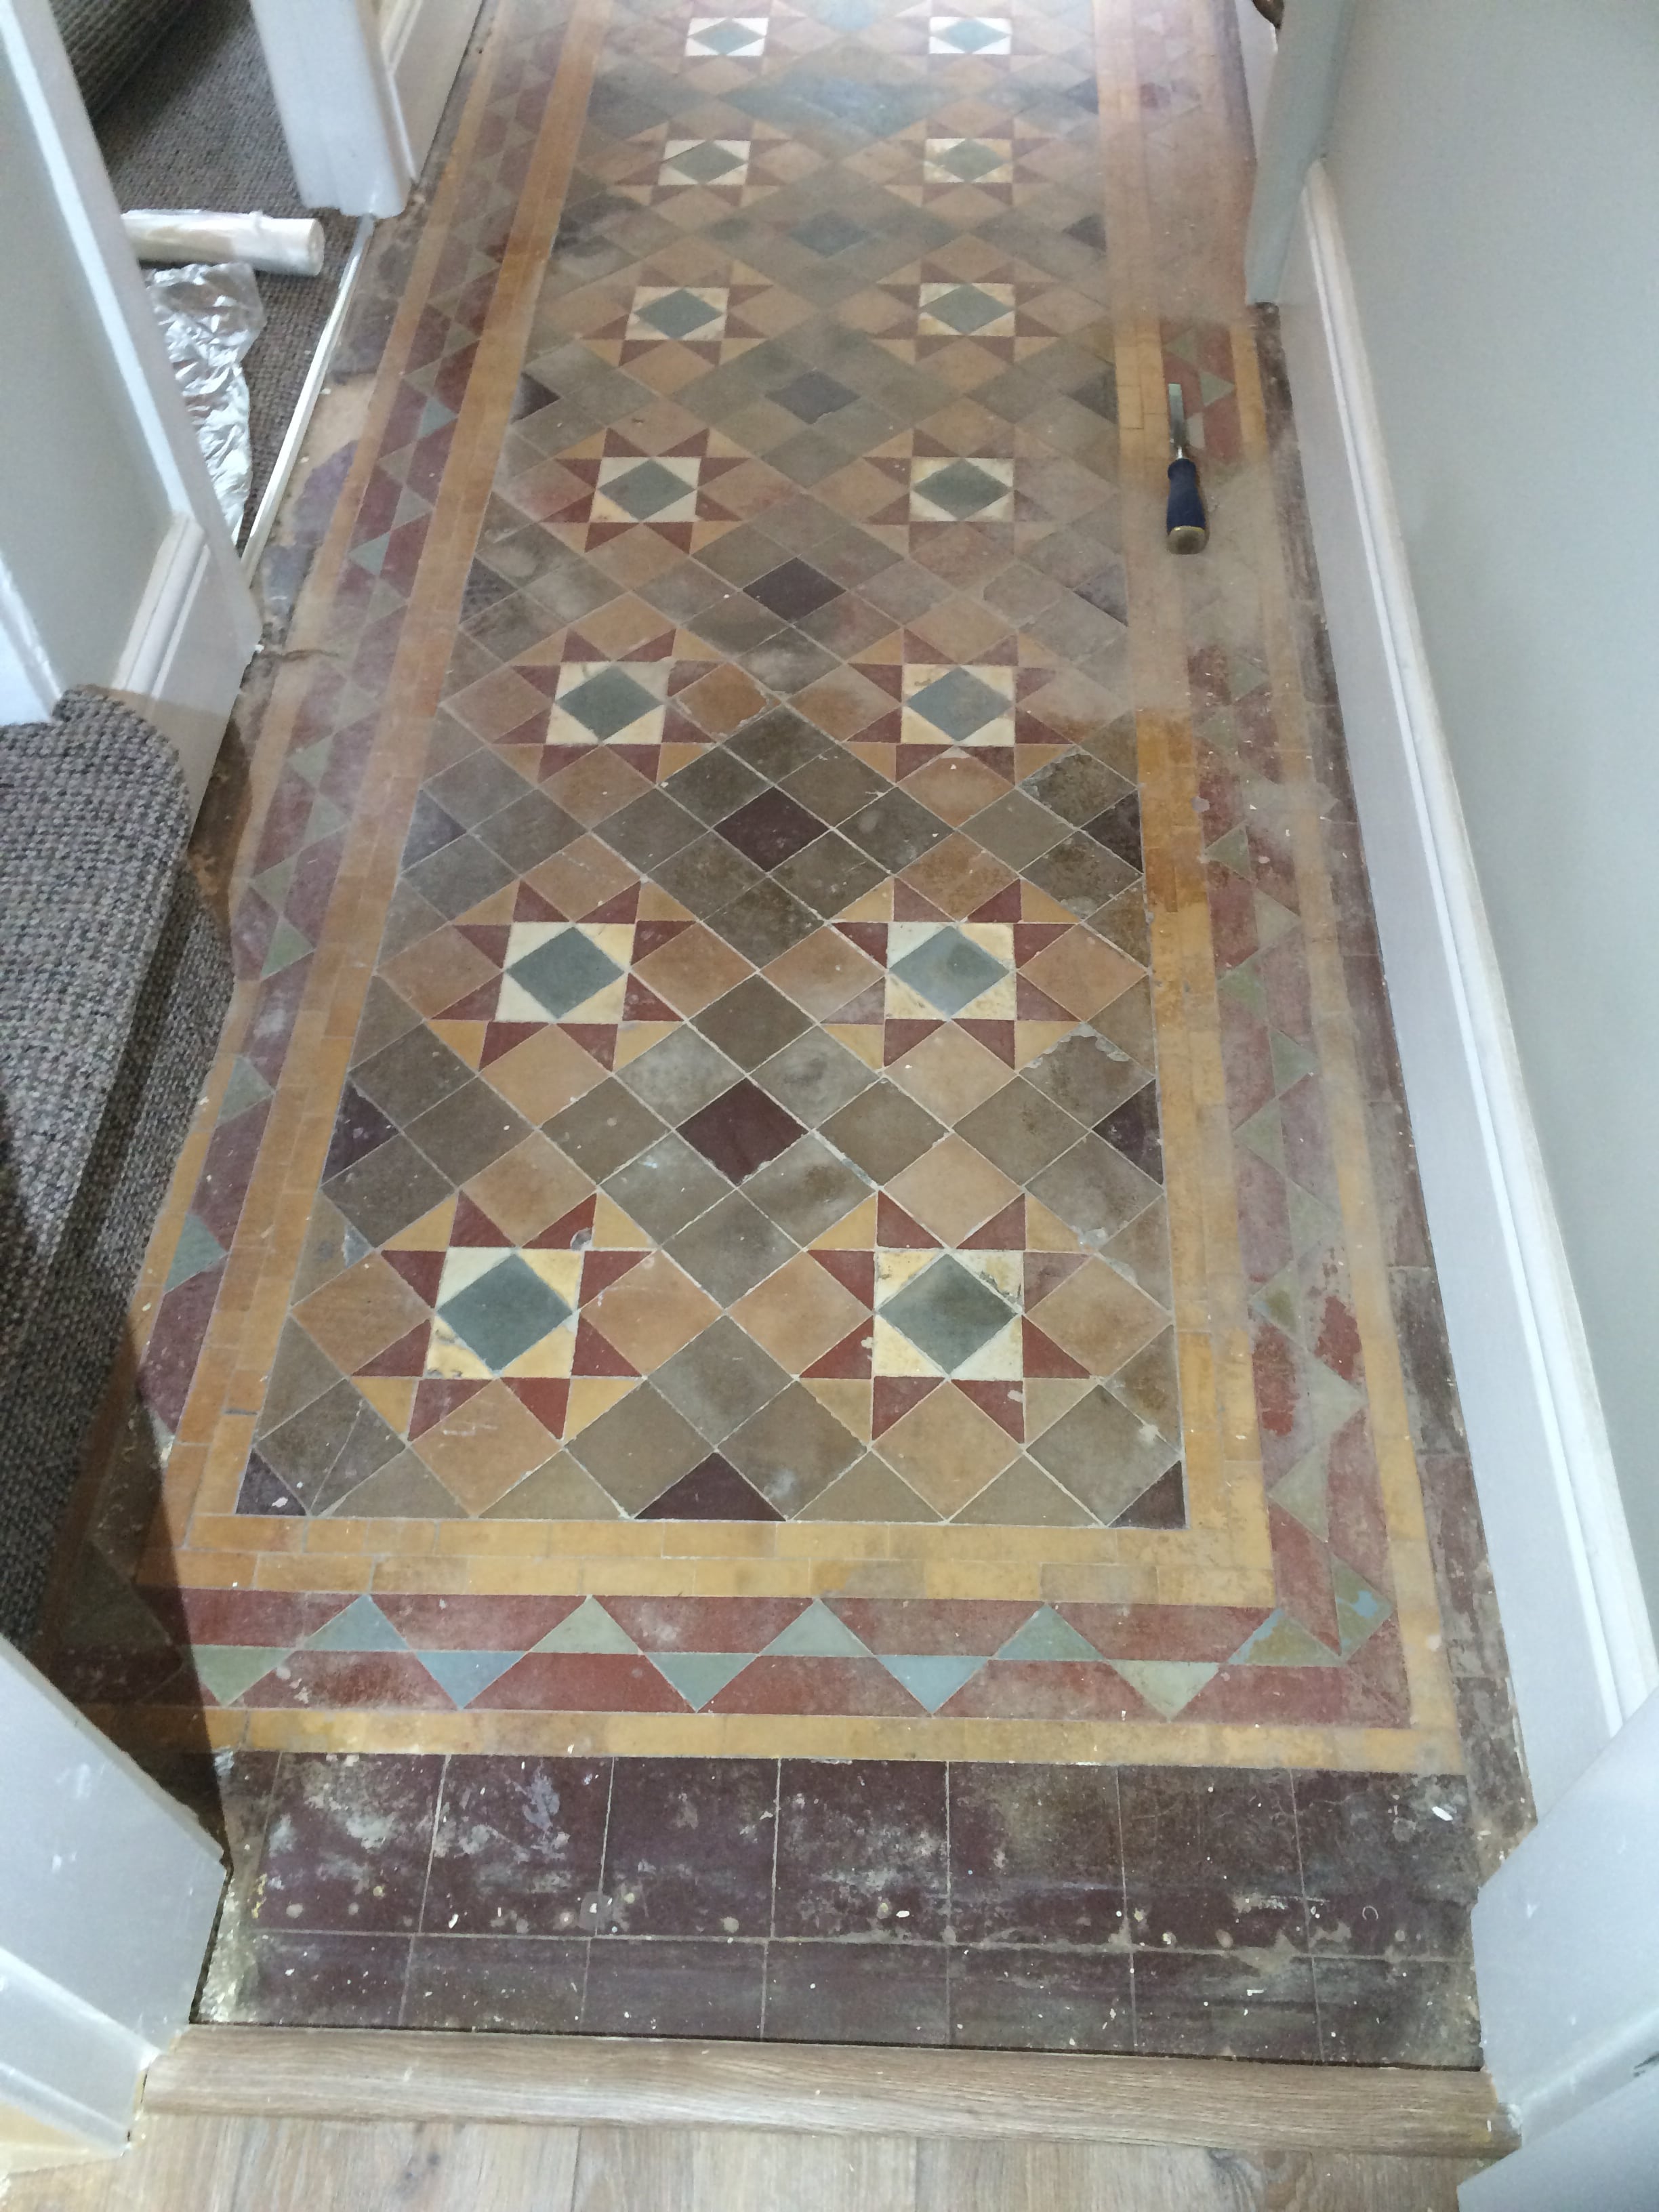 <a href='http://www.tiledoctor.co.uk/shop/category.aspx/victorian-tile-cleaning/11/?affillink=MWP1231' target='_blank'> Victorian Tiles </a> Before Renovation Burnley” width=”500″ height=”750″ title=”Victorian Tiles Before Renovation Burnley” /></p>
<p>On our initial visit I conducted a survey of the floor to check its condition and work out the most suitable products and methods to employ to restore it.  One of the main concerns we have with these old floors is damp as damp-proof membranes were not invented until relatively recently.  I have a damp meter to check for this and it did indicate high moisture levels which isn’t really an issue for cleaning the floor but would restrict our choice of sealer to those which are fully breathable and allow moisture to rise-up through the tile.   We agreed a price and schedule with the customer and within two weeks we were able to start the work.</p>
<h2>Cleaning an Original Victorian Tiled Hallway Floor</h2>
<p>The floor was in quite a state, made worse I suspect by recent restoration work by other contractors who unfortunately didn’t take as much care with the floor as the could have done.   </p>
<p>After protecting the skirting boards and carpets with film work got underway starting by applying a strong dilution of <a href=